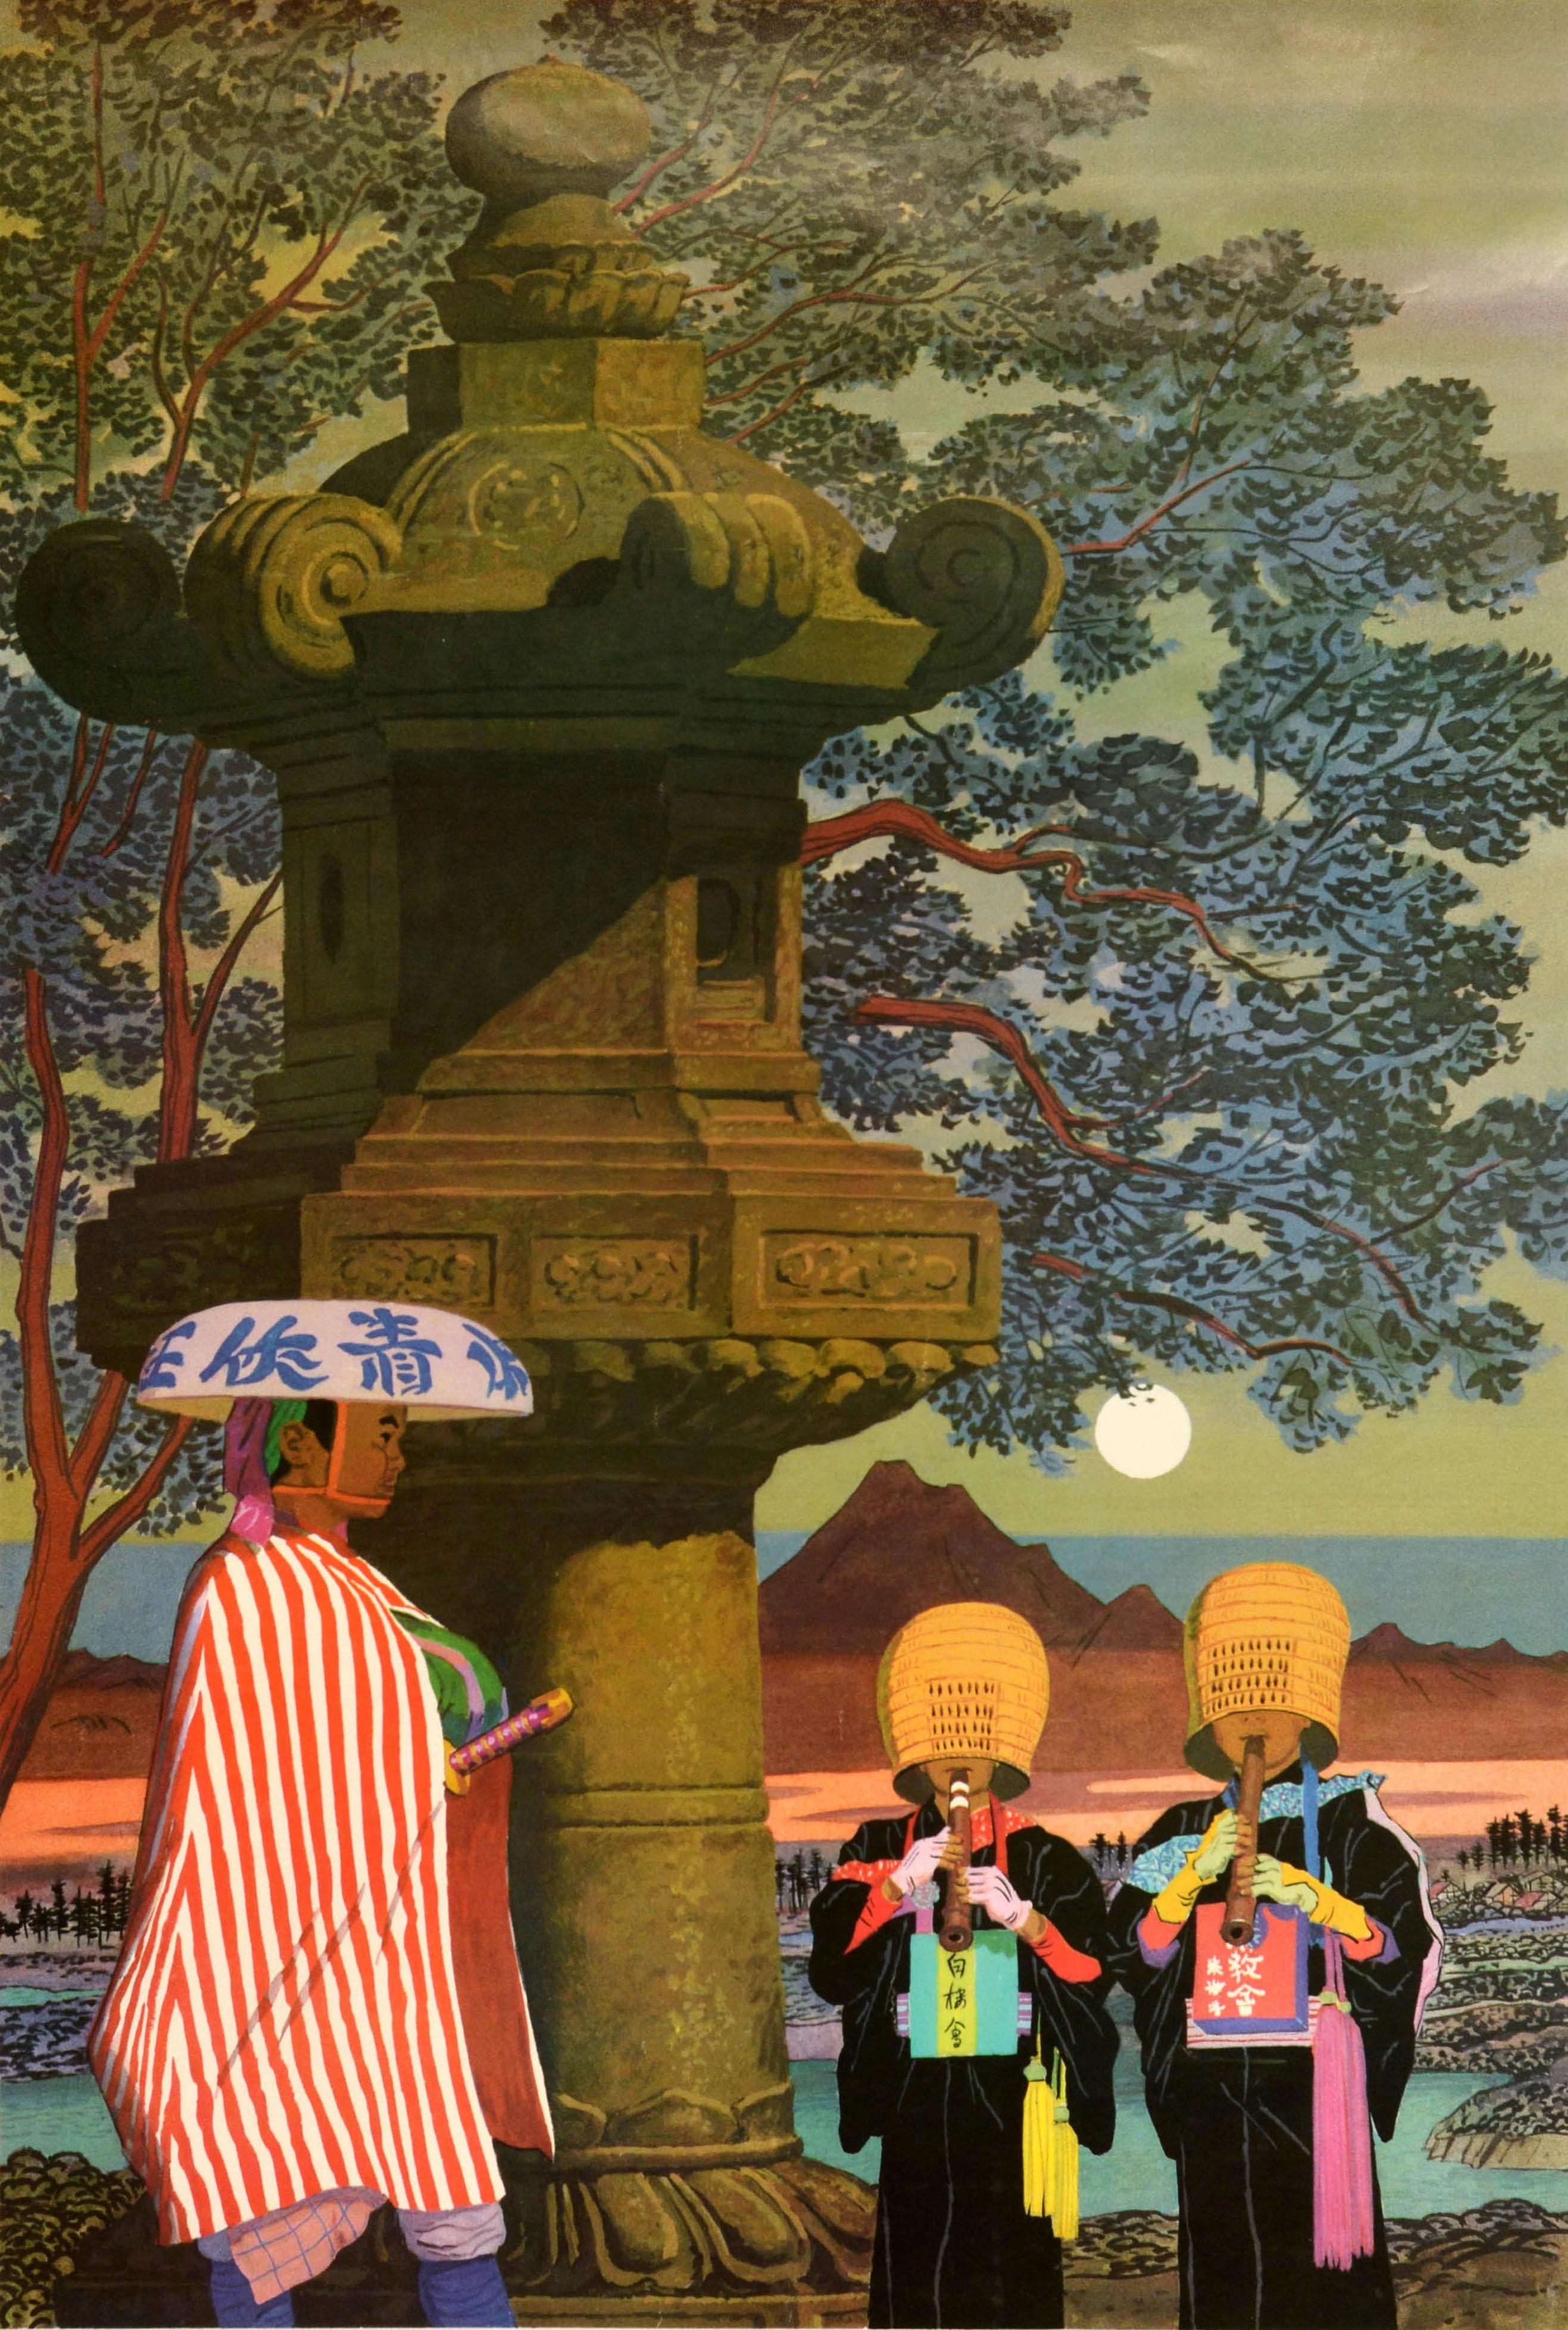 Original vintage travel advertising poster for Japan featuring a great image of a person wearing a traditional bamboo woven Sandogasa Ronin Samurai hat carrying a sword under his red and white cloak walking by two Komuso Zen Buddhist monks wearing